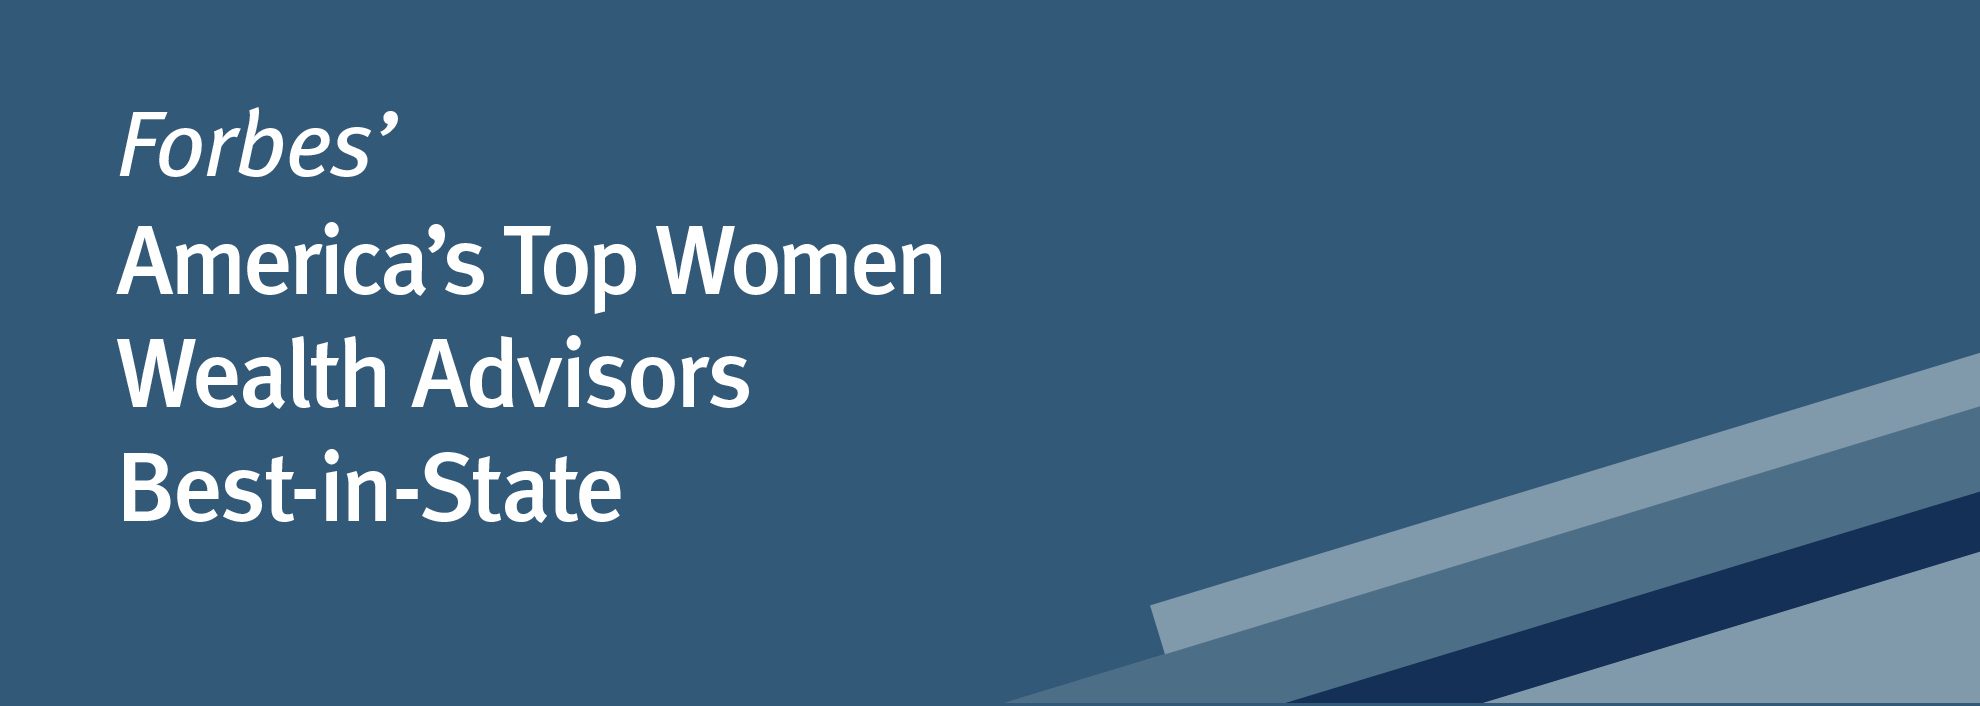 Forbes’ Americaʼs Top Women Wealth Advisors Best-in-State